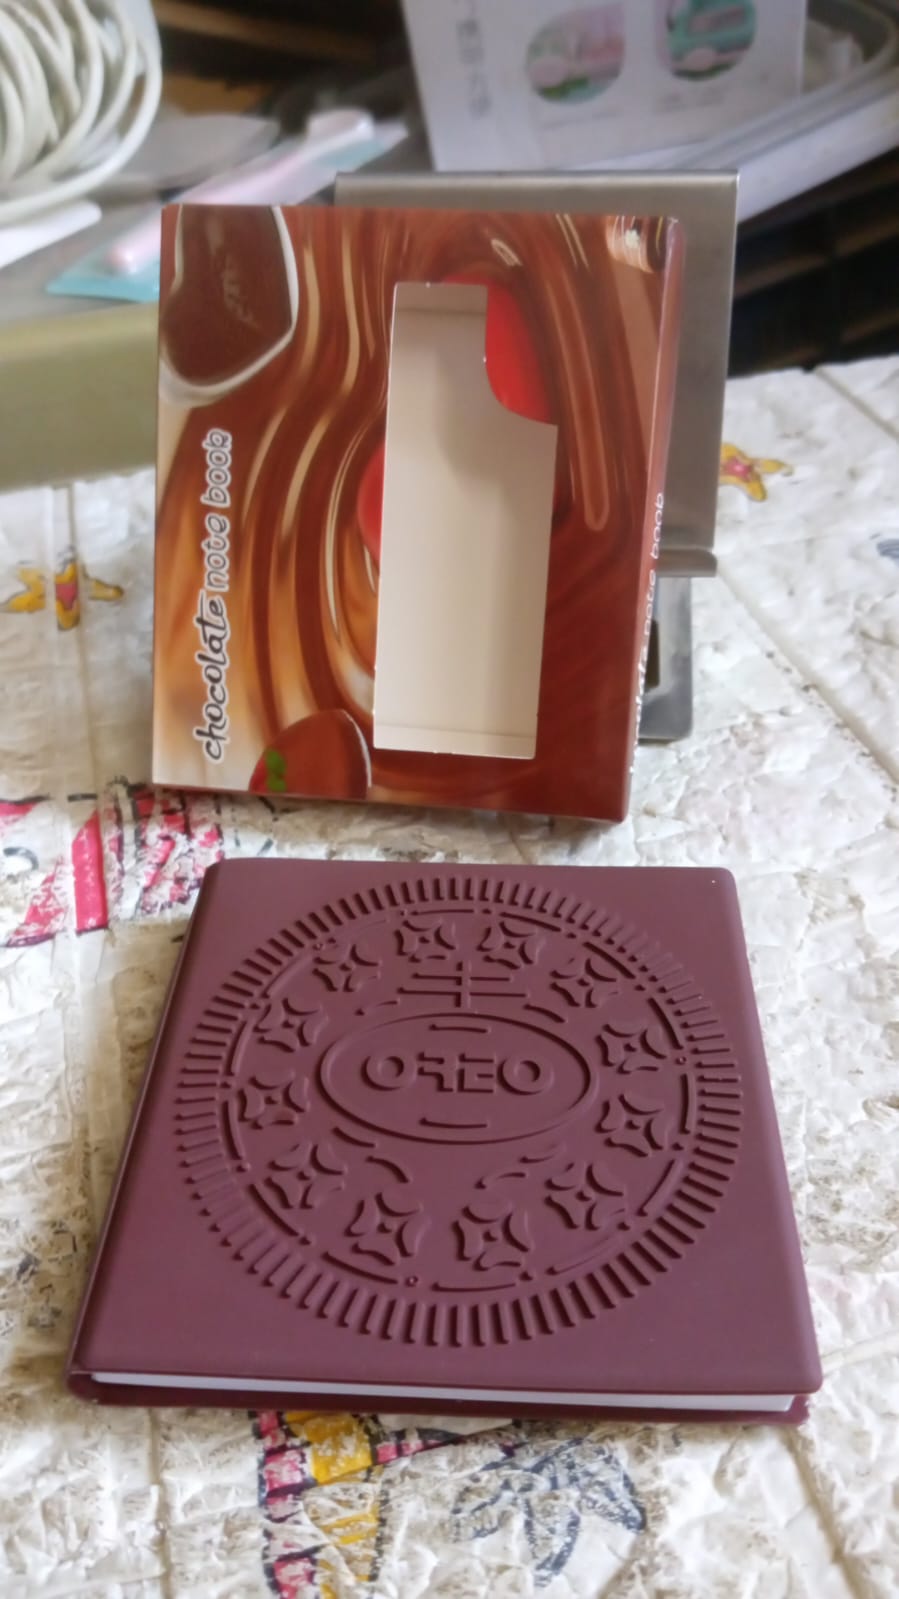 17670 Chocolate Diary Notebooks Original Chocolate Smell Writing Practice Book Early Learning Copybook Premium Chocolate Book (1Pc / Book / 80 Pages) 